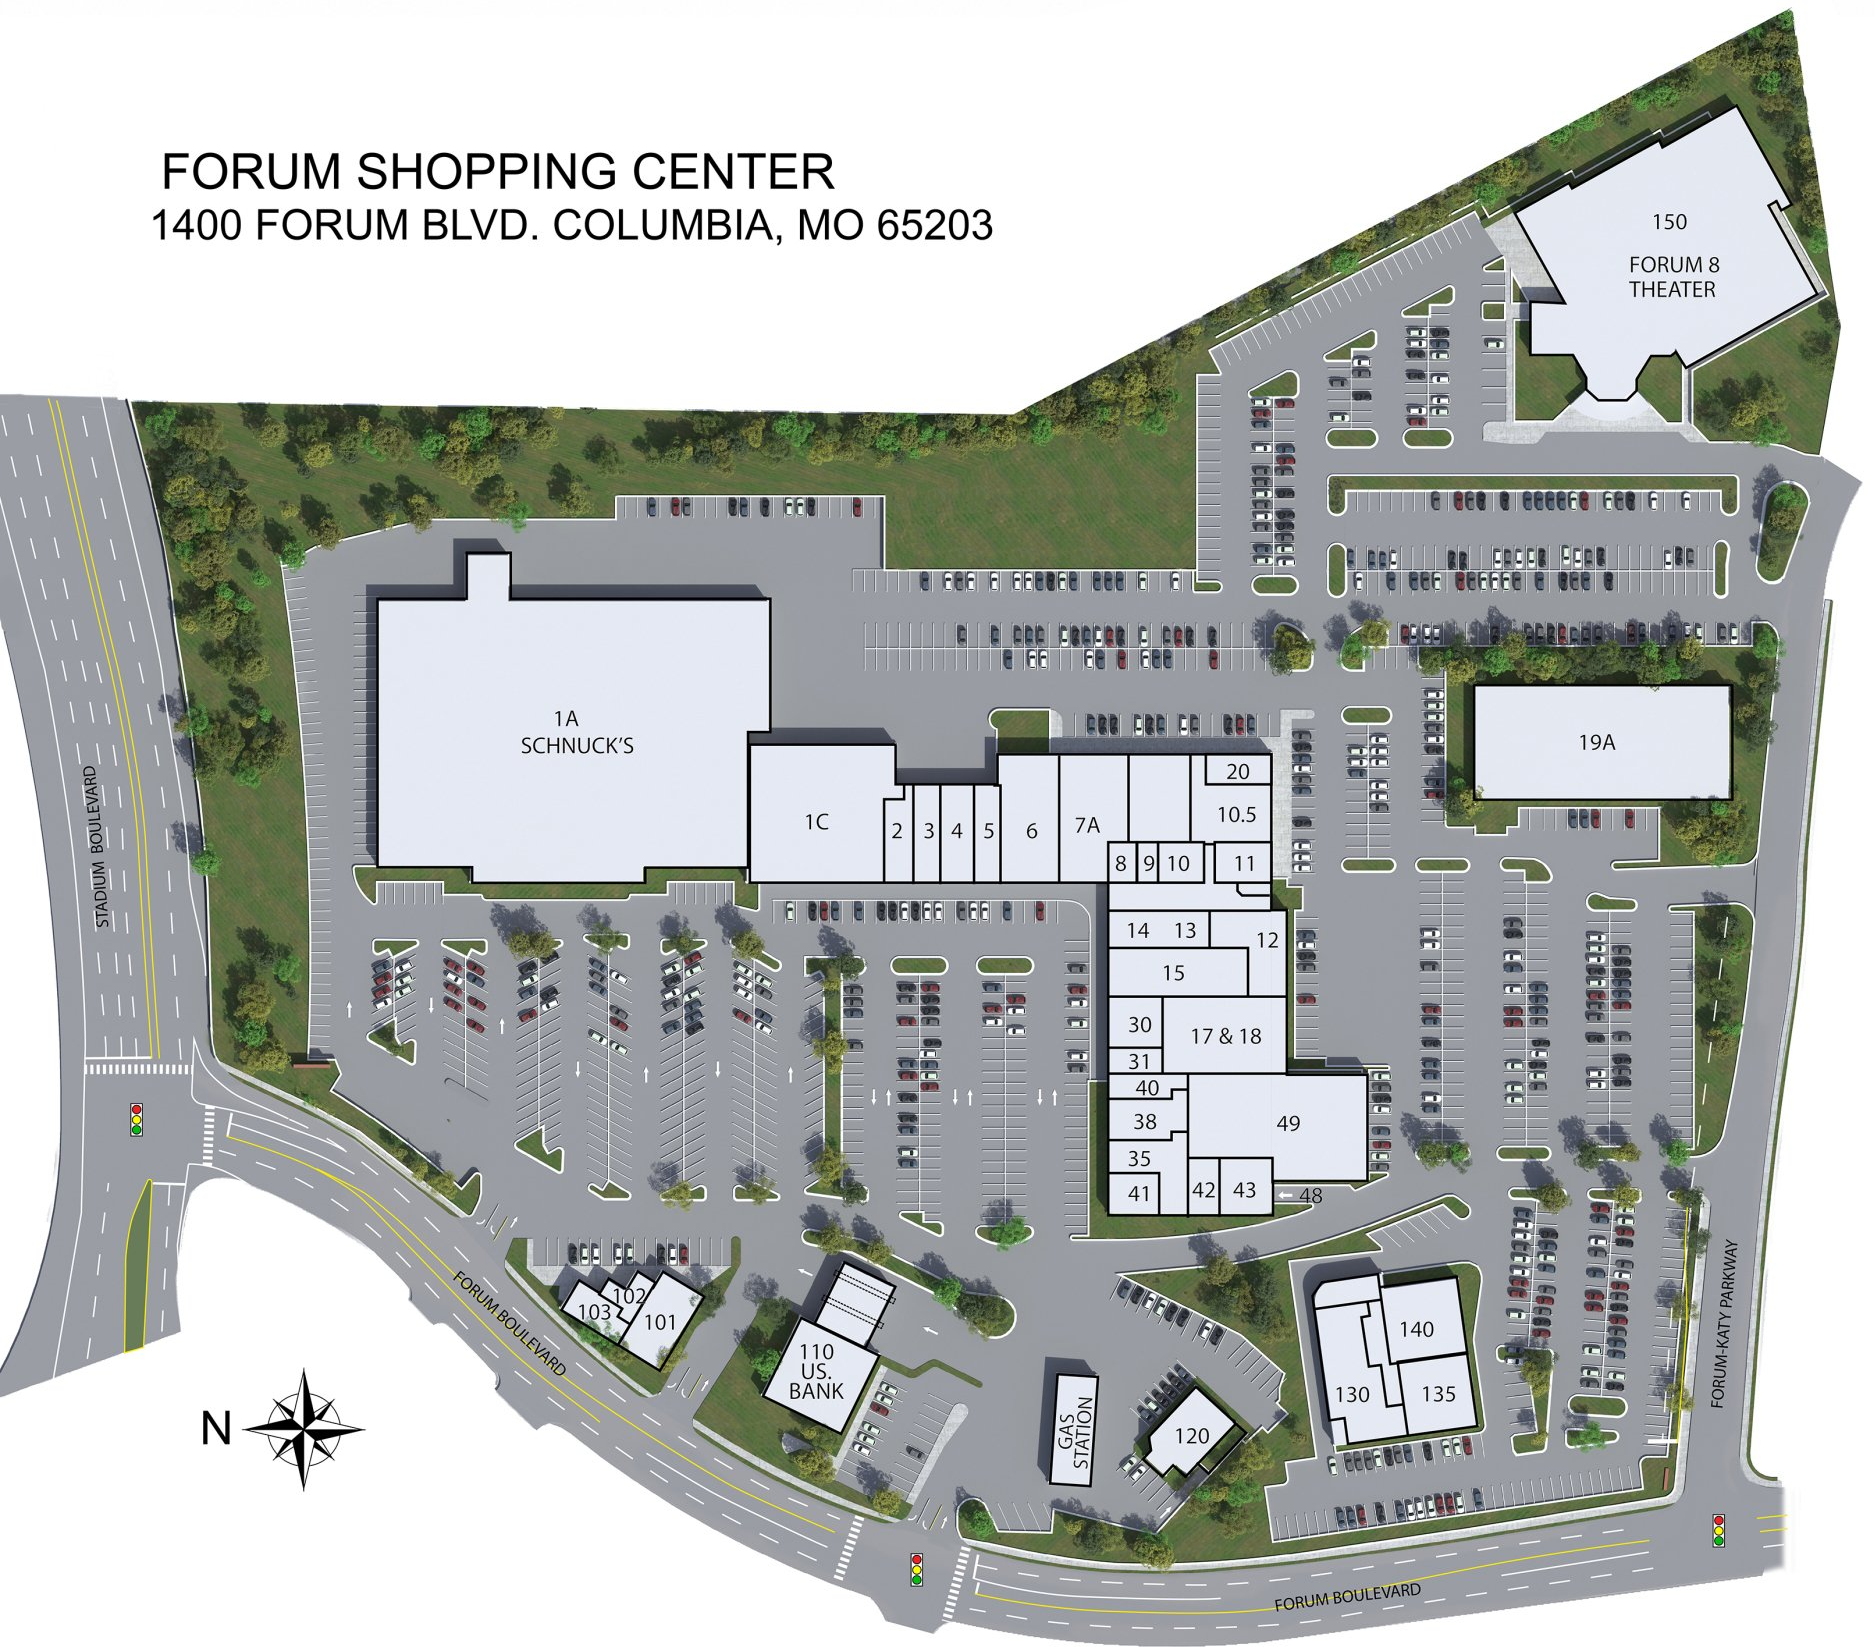 Forum Shopping Center Site Plan in Columbia, MO. Learn More at Lindner Properties